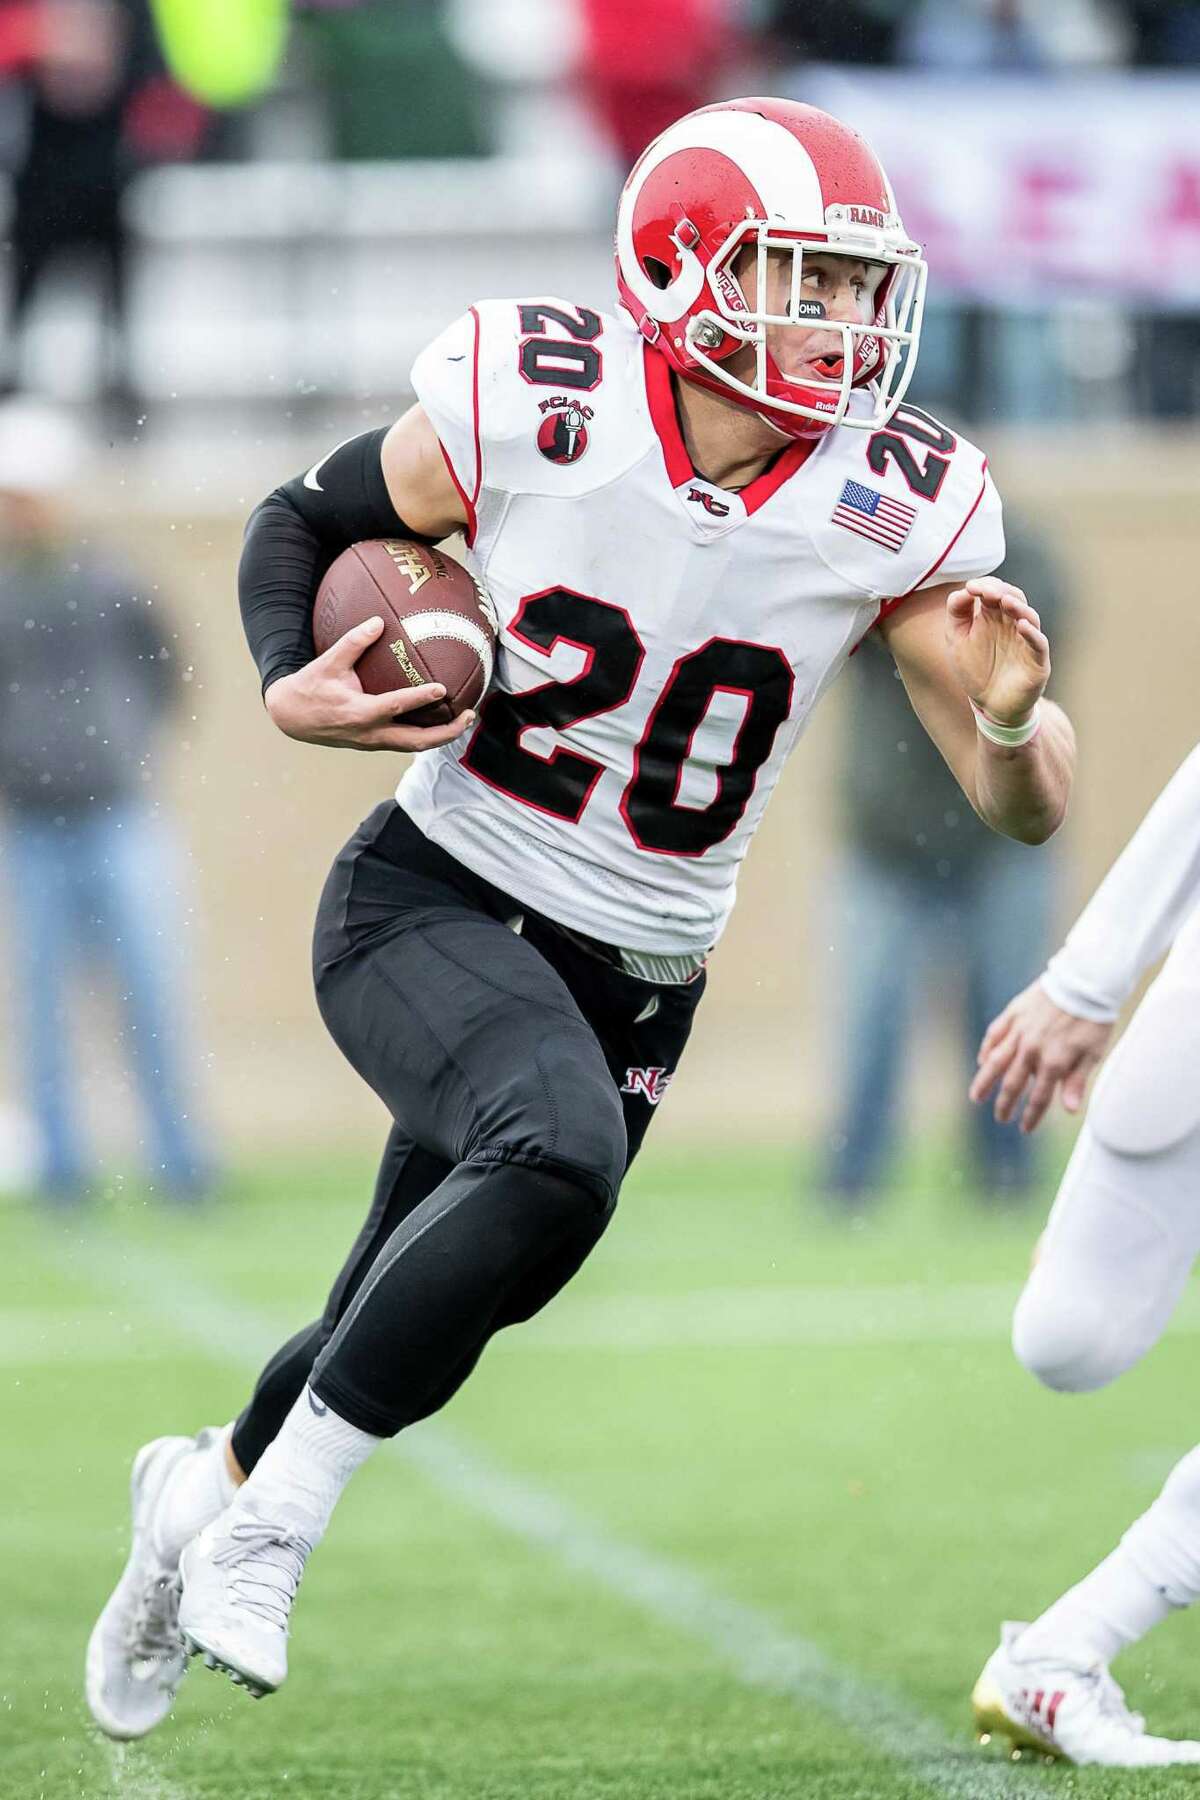 Quintin O'Connell (20) of New Canaan runs with the ball after a reception during a football game between New Canaan and Fairfield Prep on December 2, 2018 at Fairfield University in Fairfield, CT.